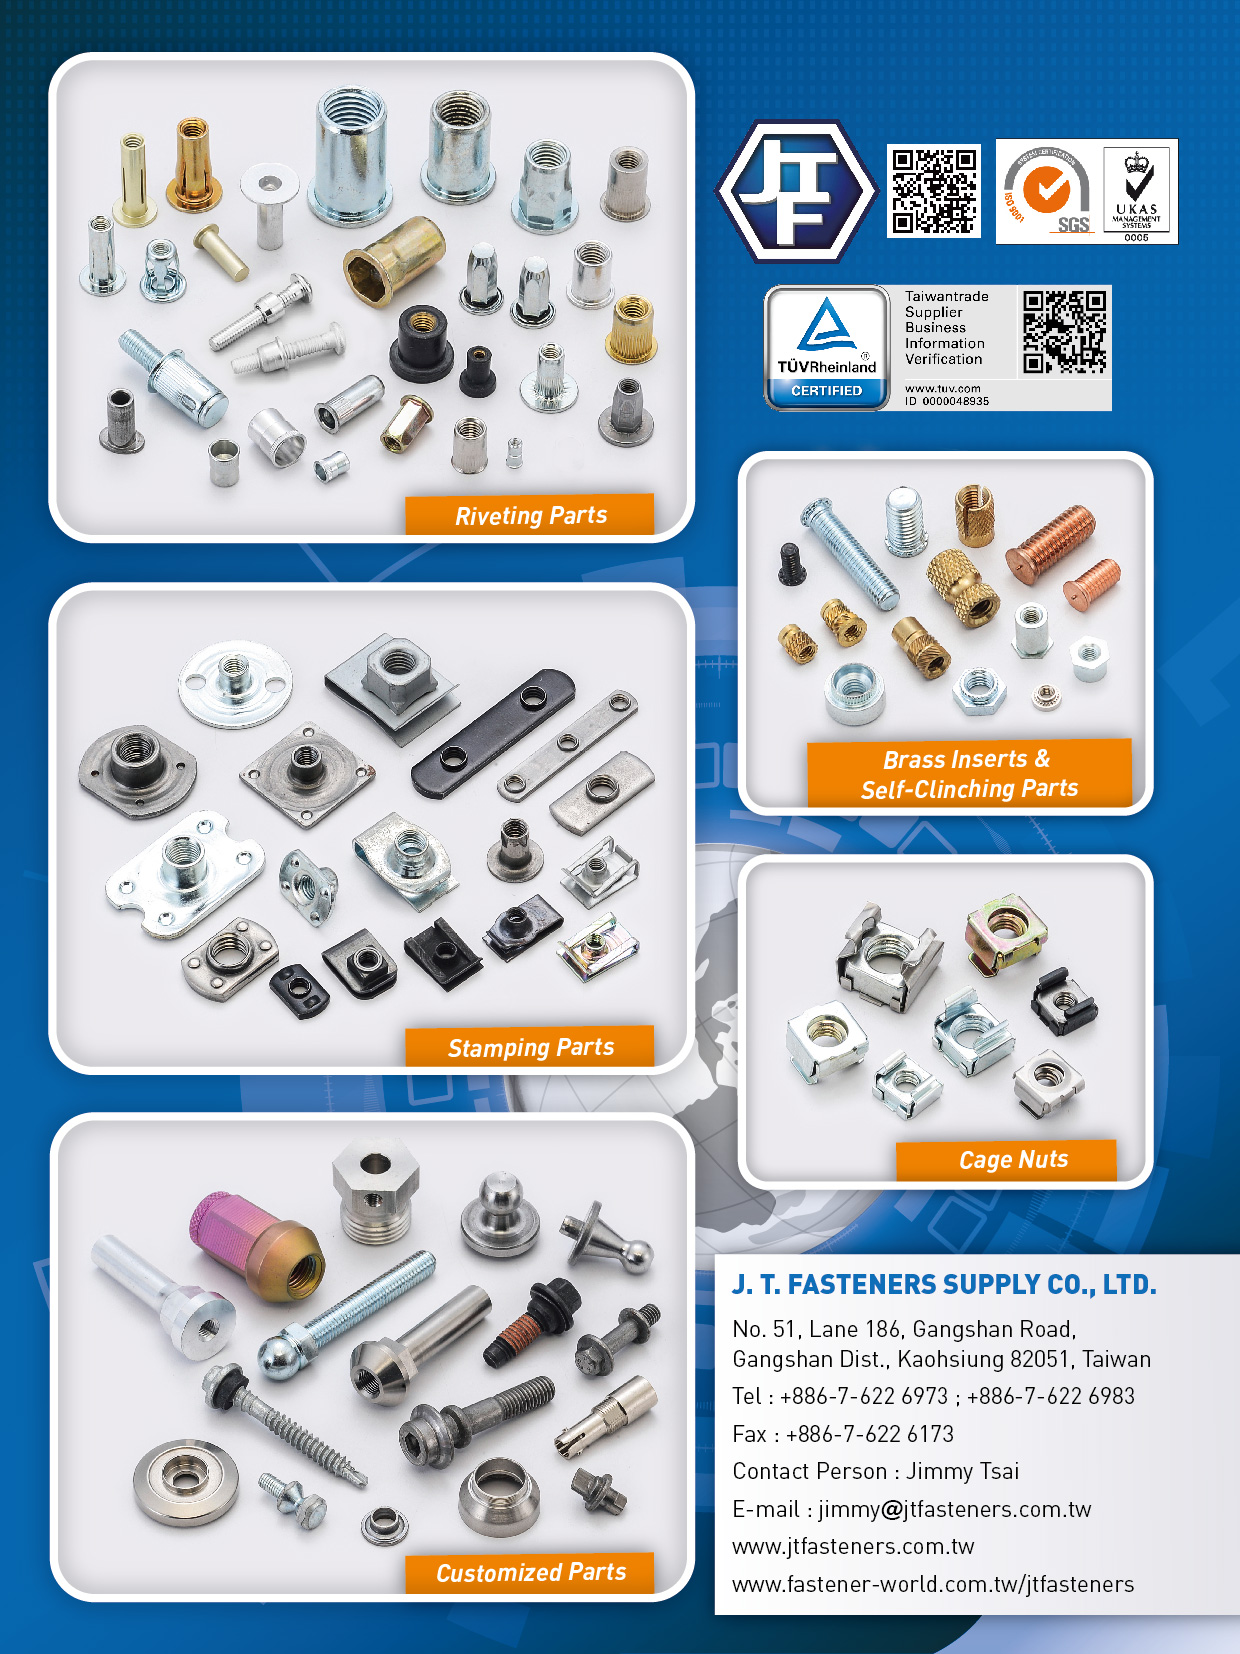 J. T. FASTENERS SUPPLY CO., LTD. _Online Catalogues